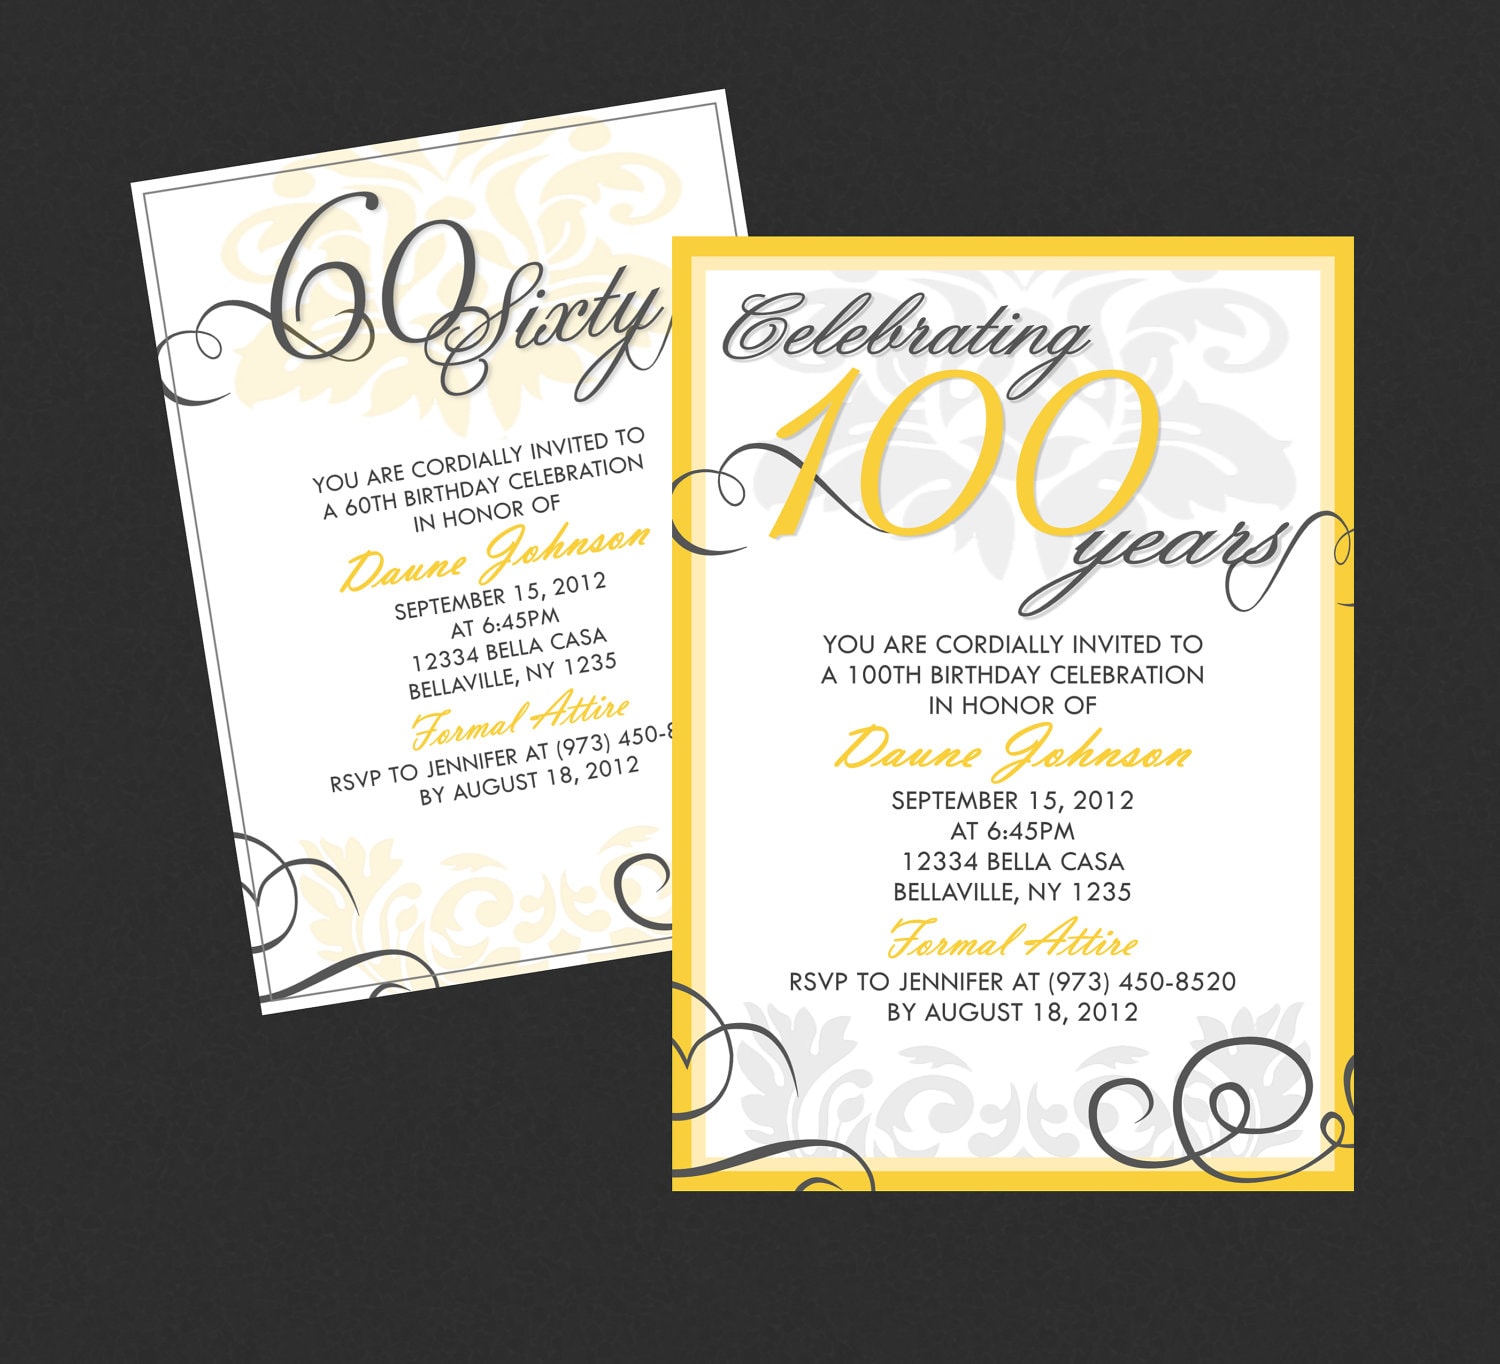 the-25-best-ideas-for-adult-birthday-invitation-wording-home-family